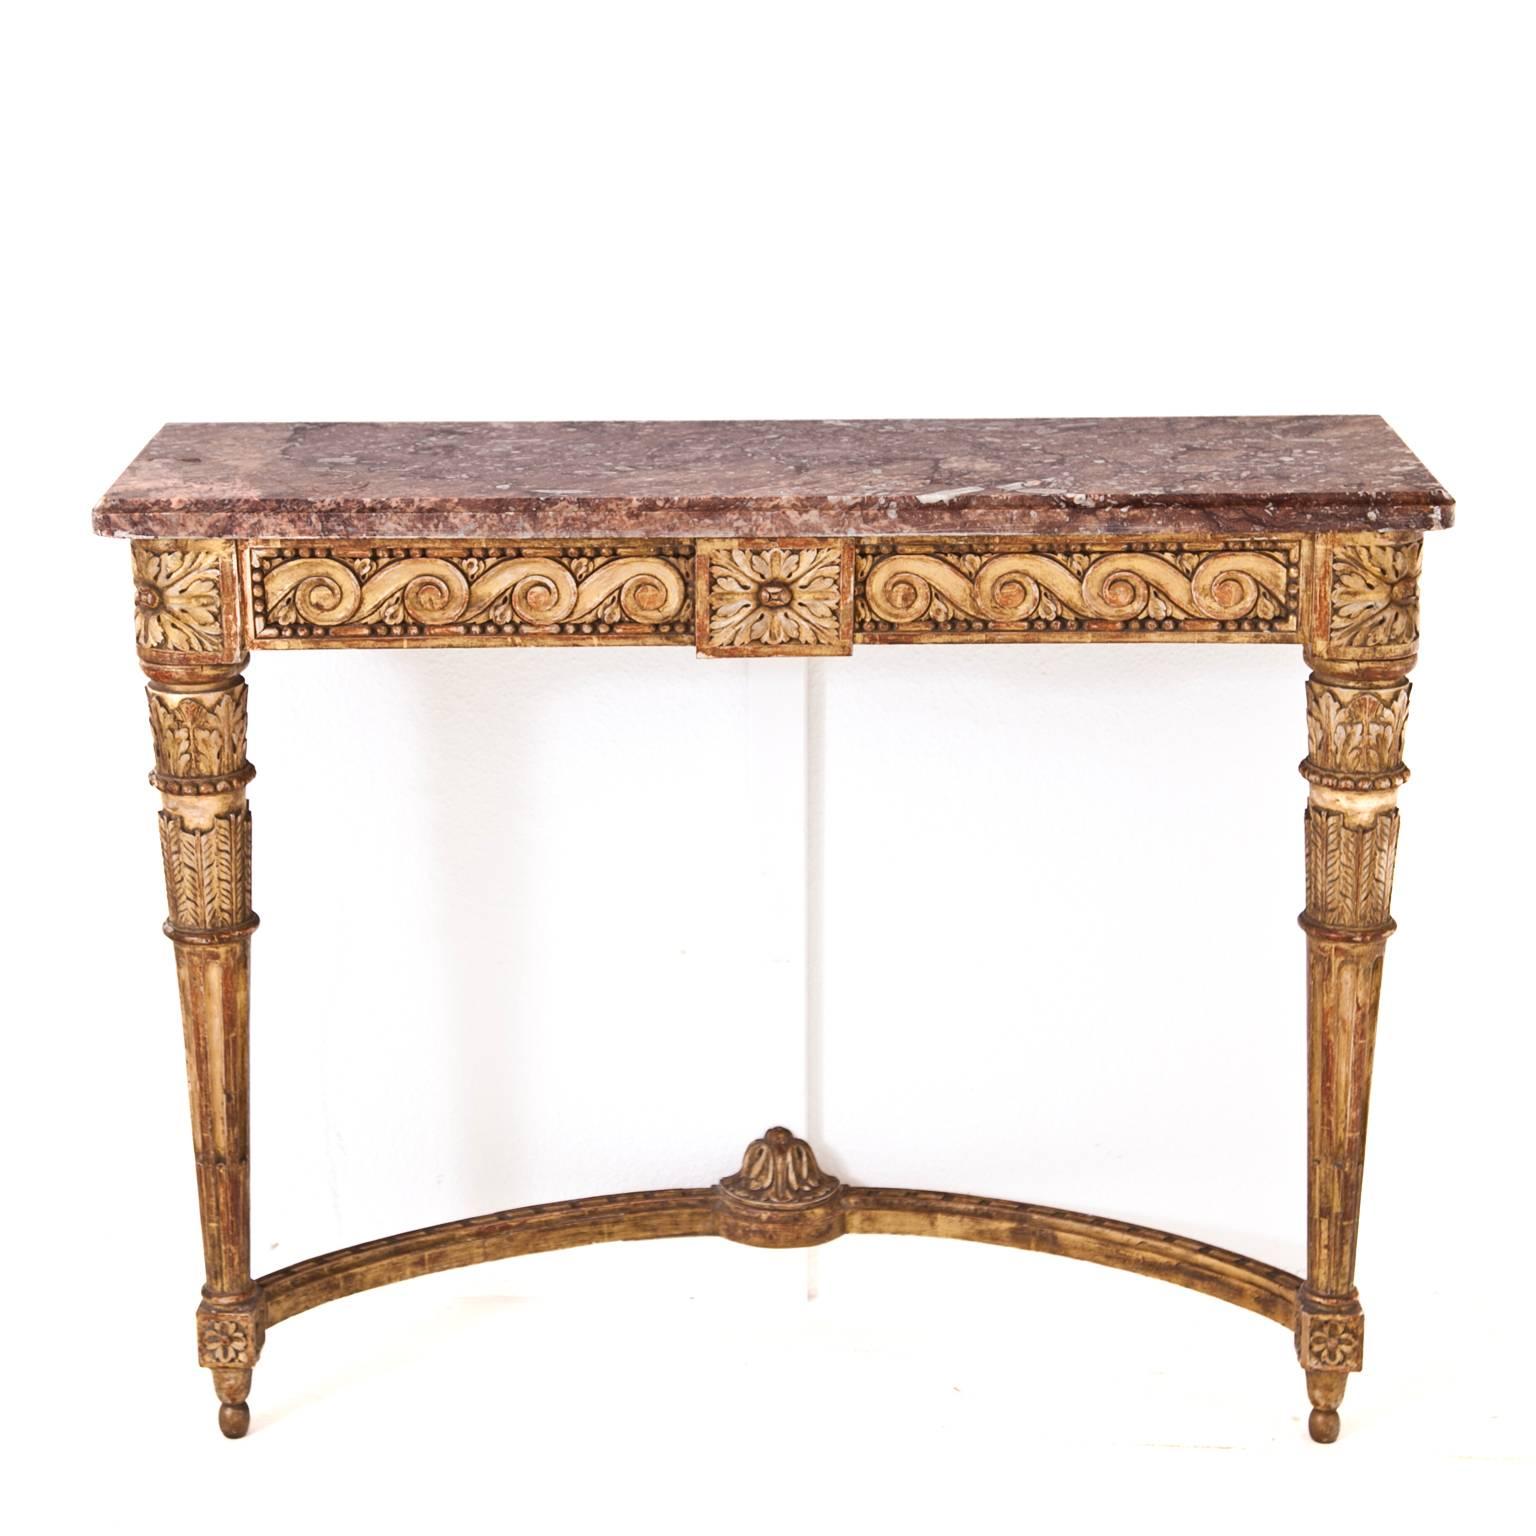 Louis-Seize console table with red marble top on gilt fluted legs. On the front running scrolls ornament framed with pearls. The console's depth was changed in the 19th century.